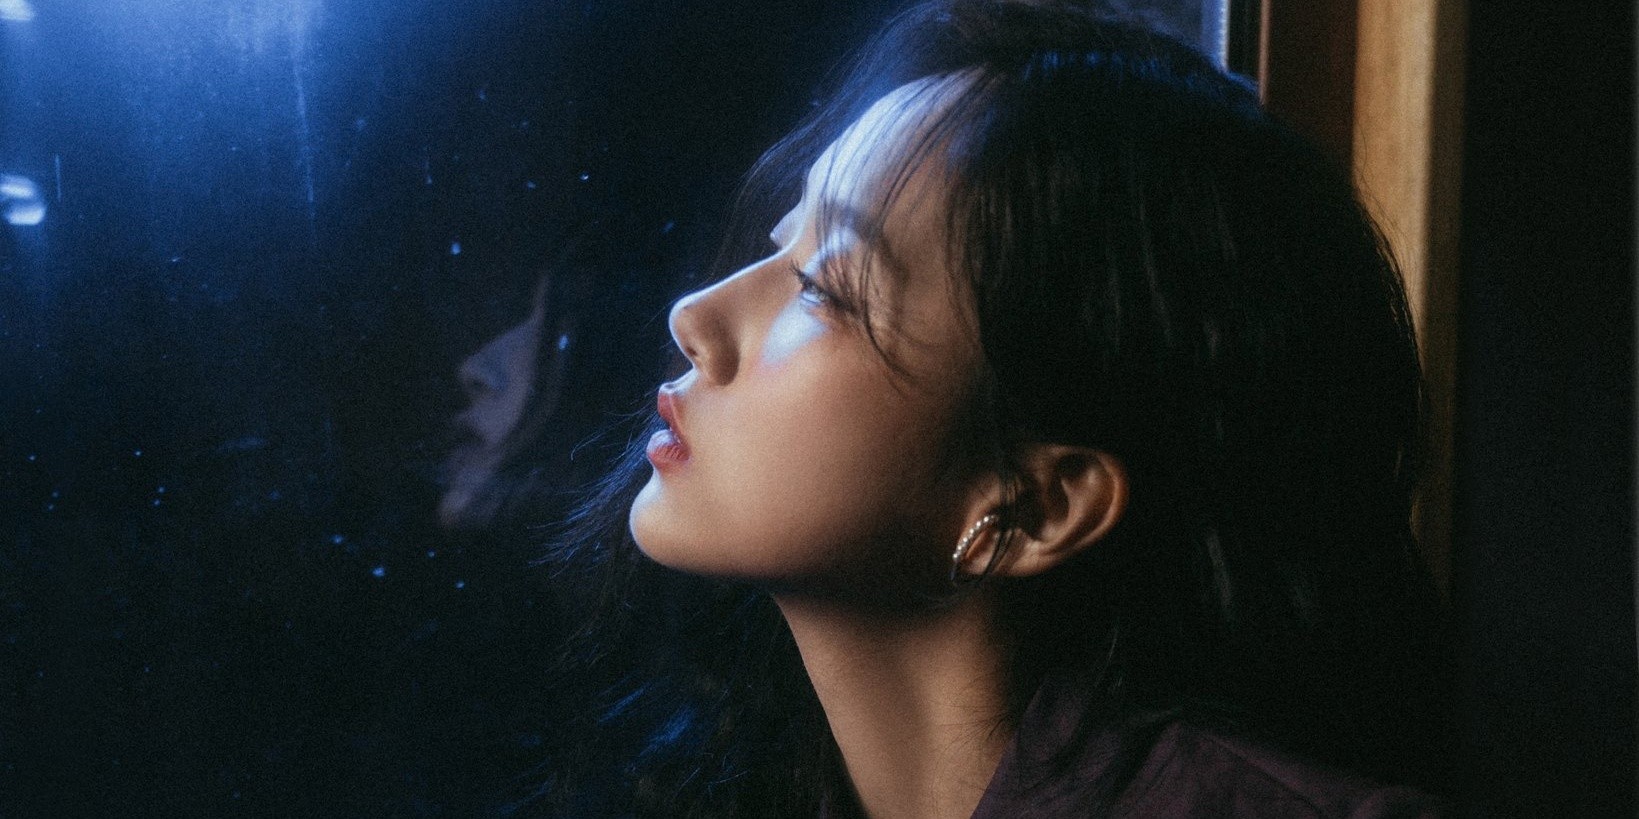 Seori releases collaborative single with GIRIBOY, 'The Long Night' — listen